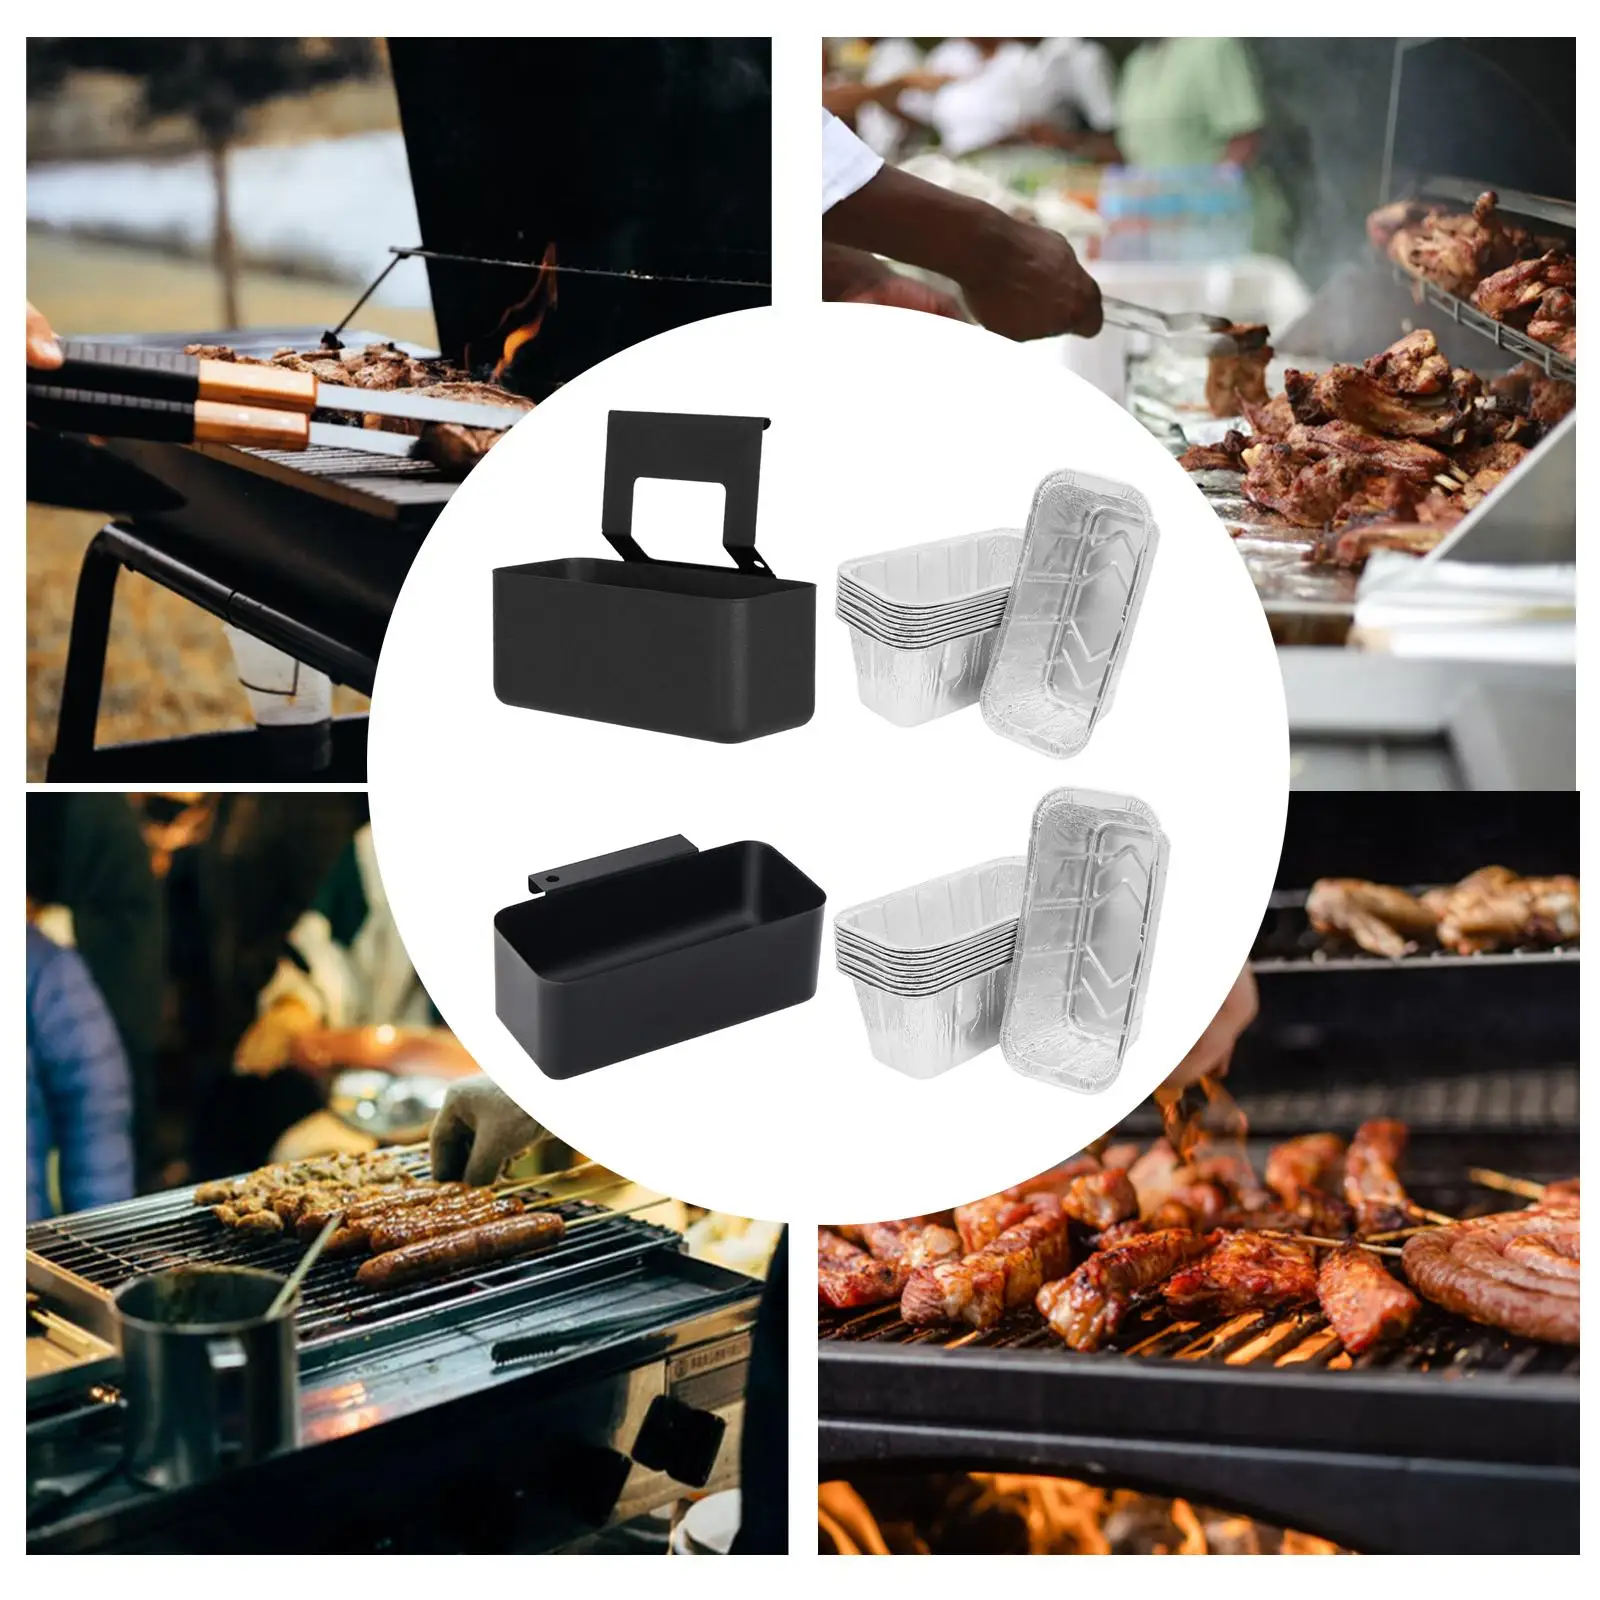  Cup pans grill Collection  with Tin fs Liners  Cup pans Sve Griddle Pan BBQ Part Barbecue Accessories